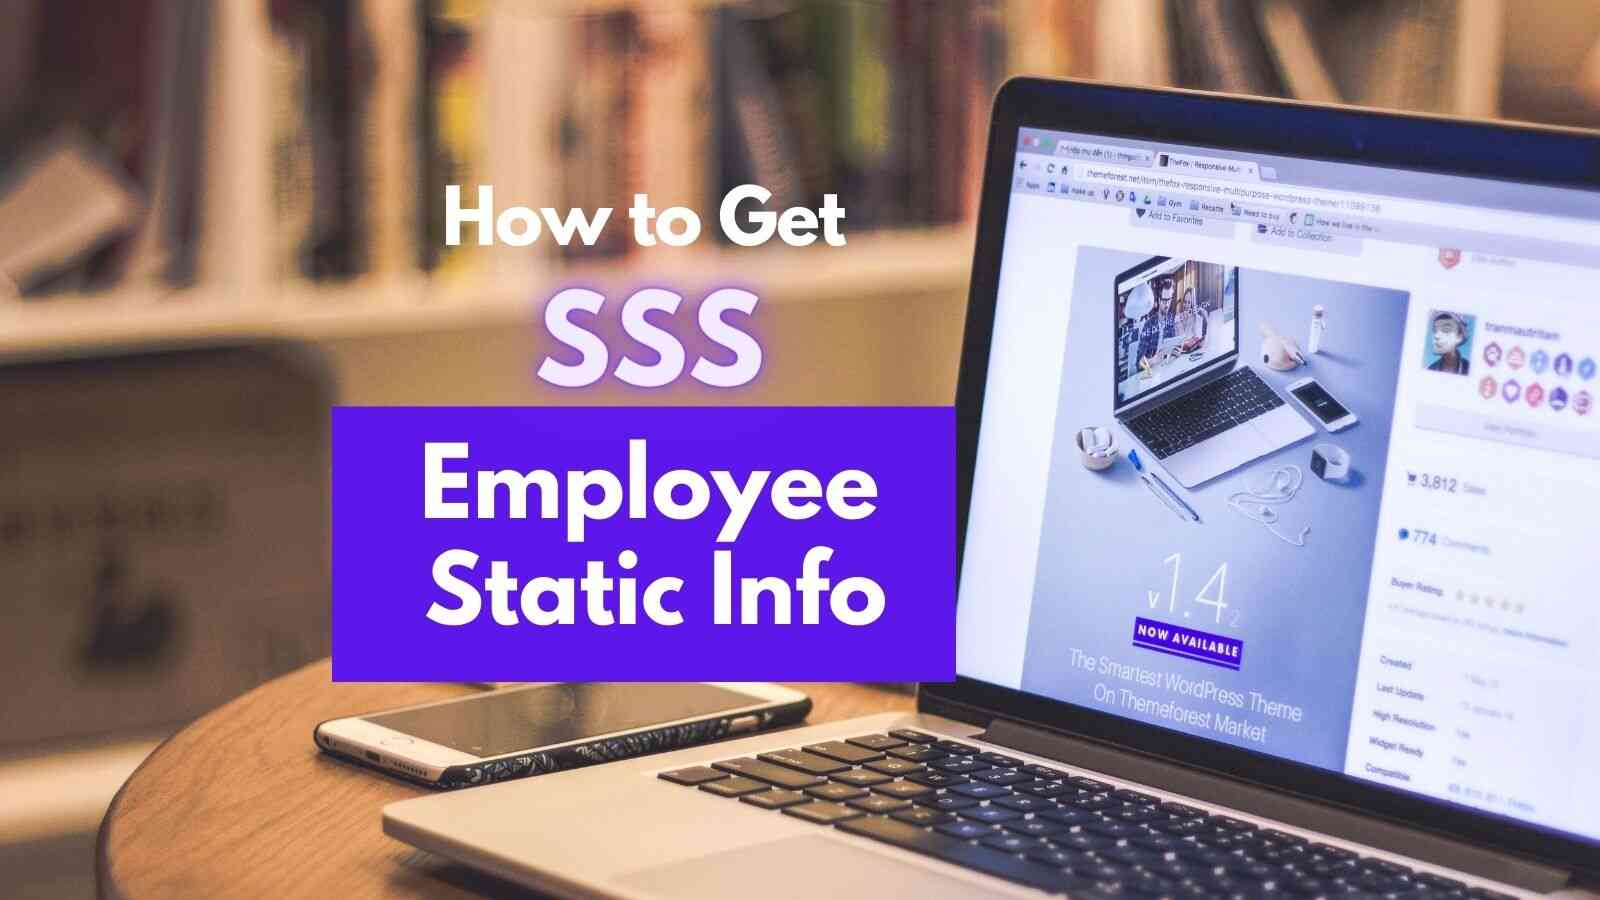 how to get SSS employee static inf and employment history